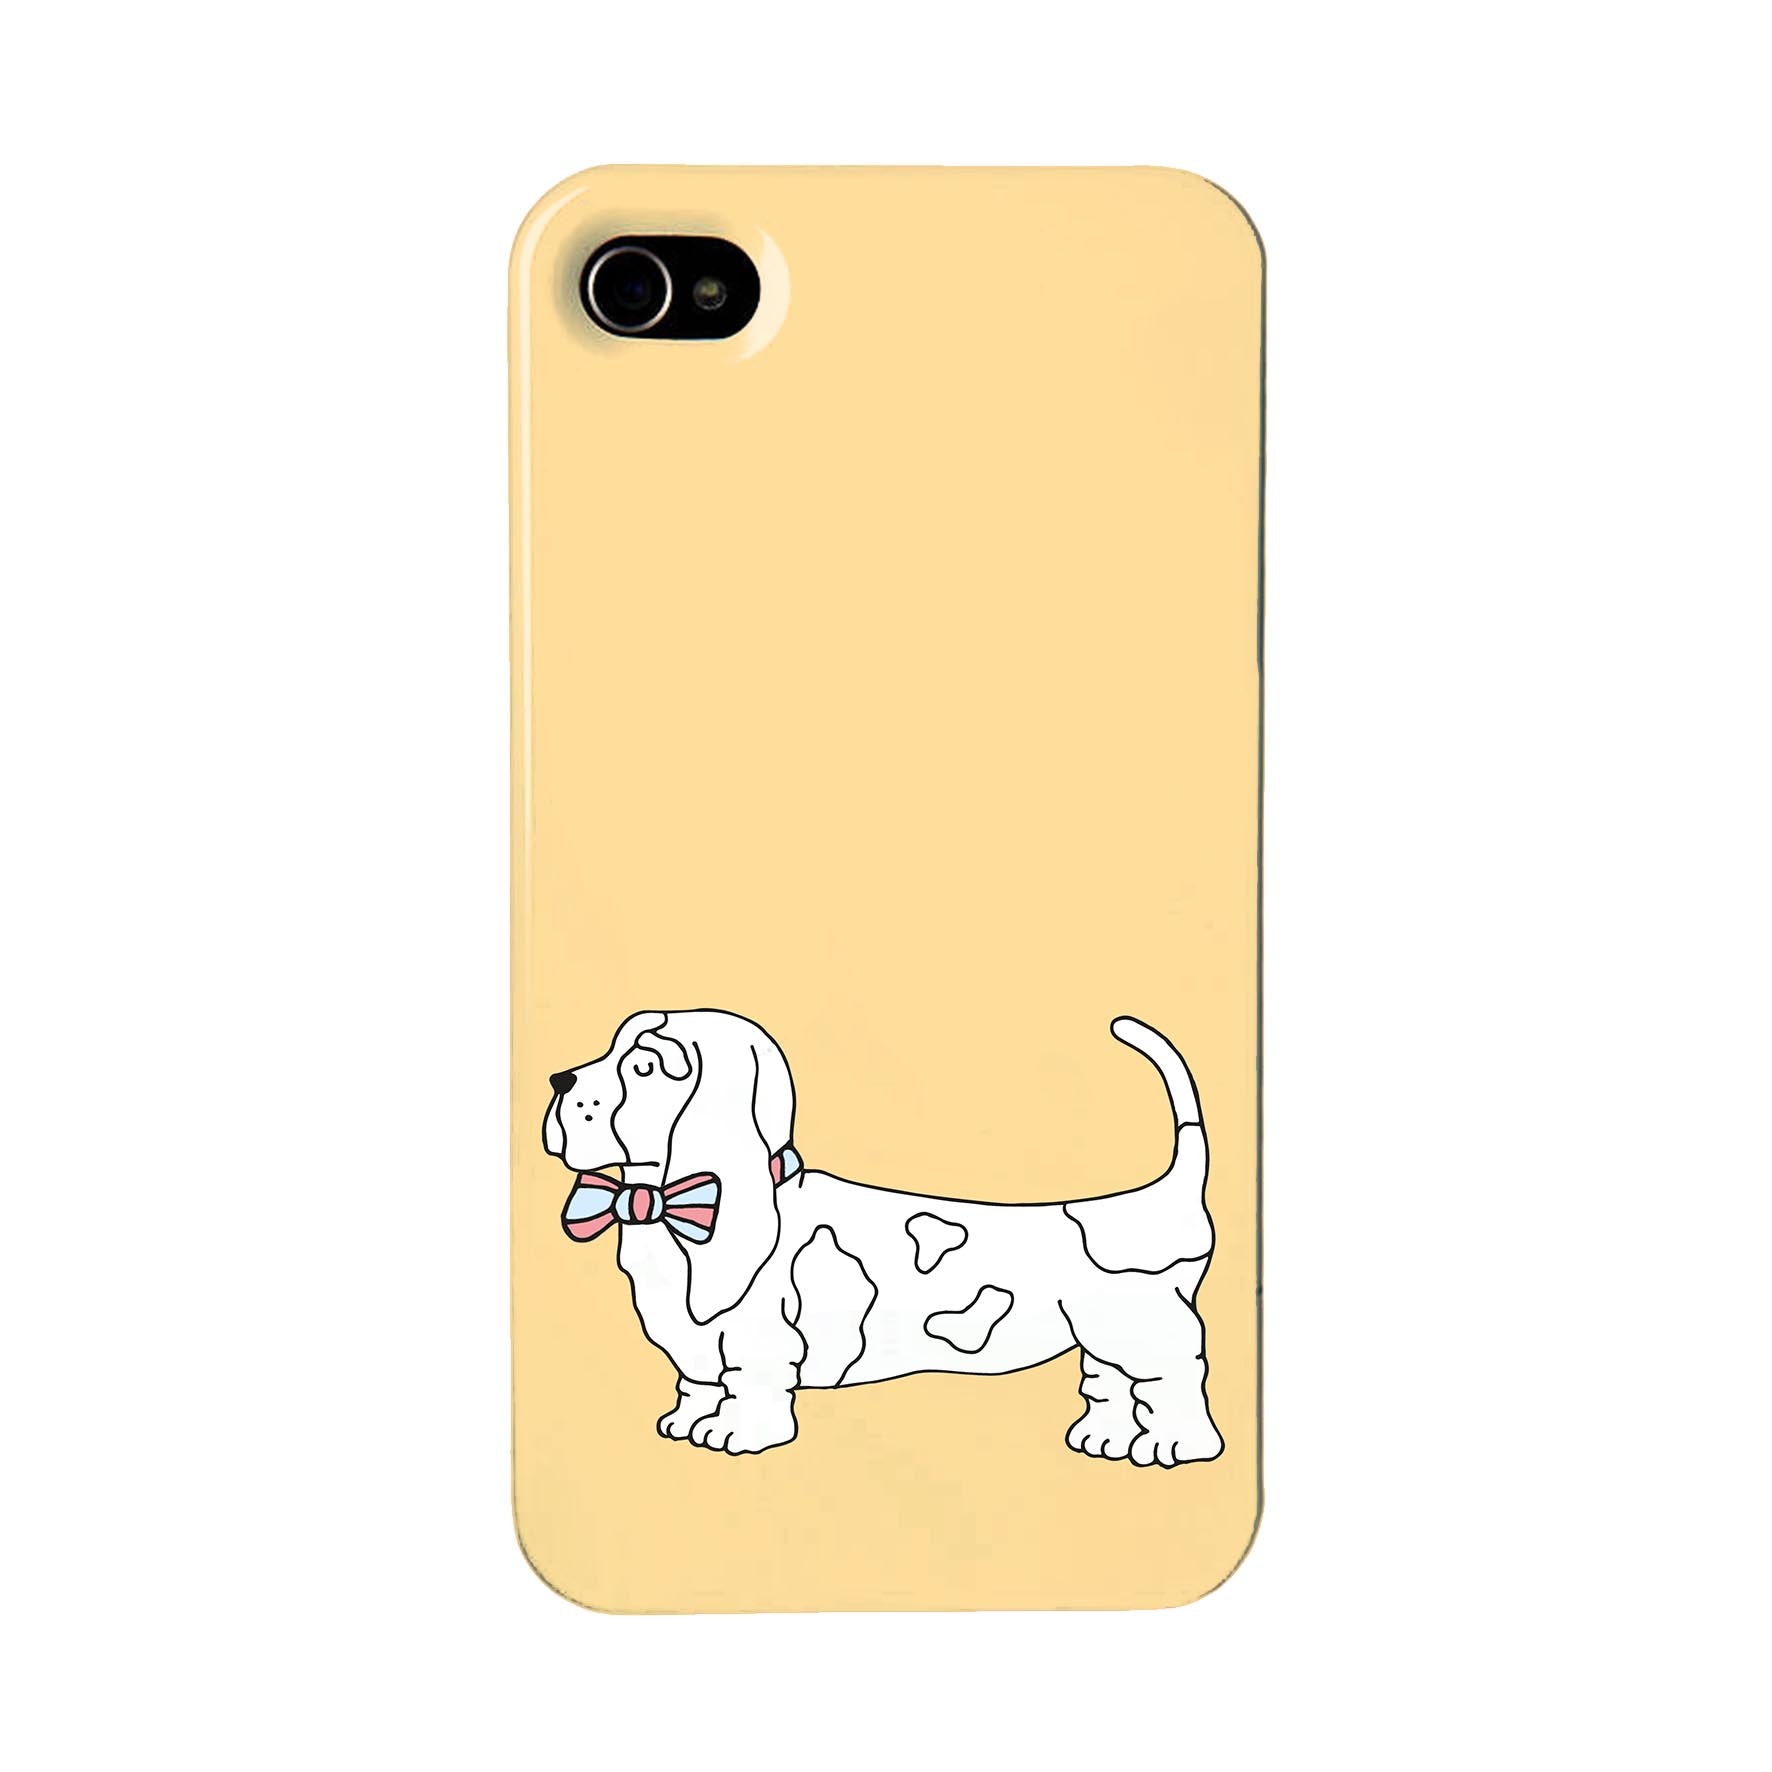 Orange phone case with an illustration of a bassett hound